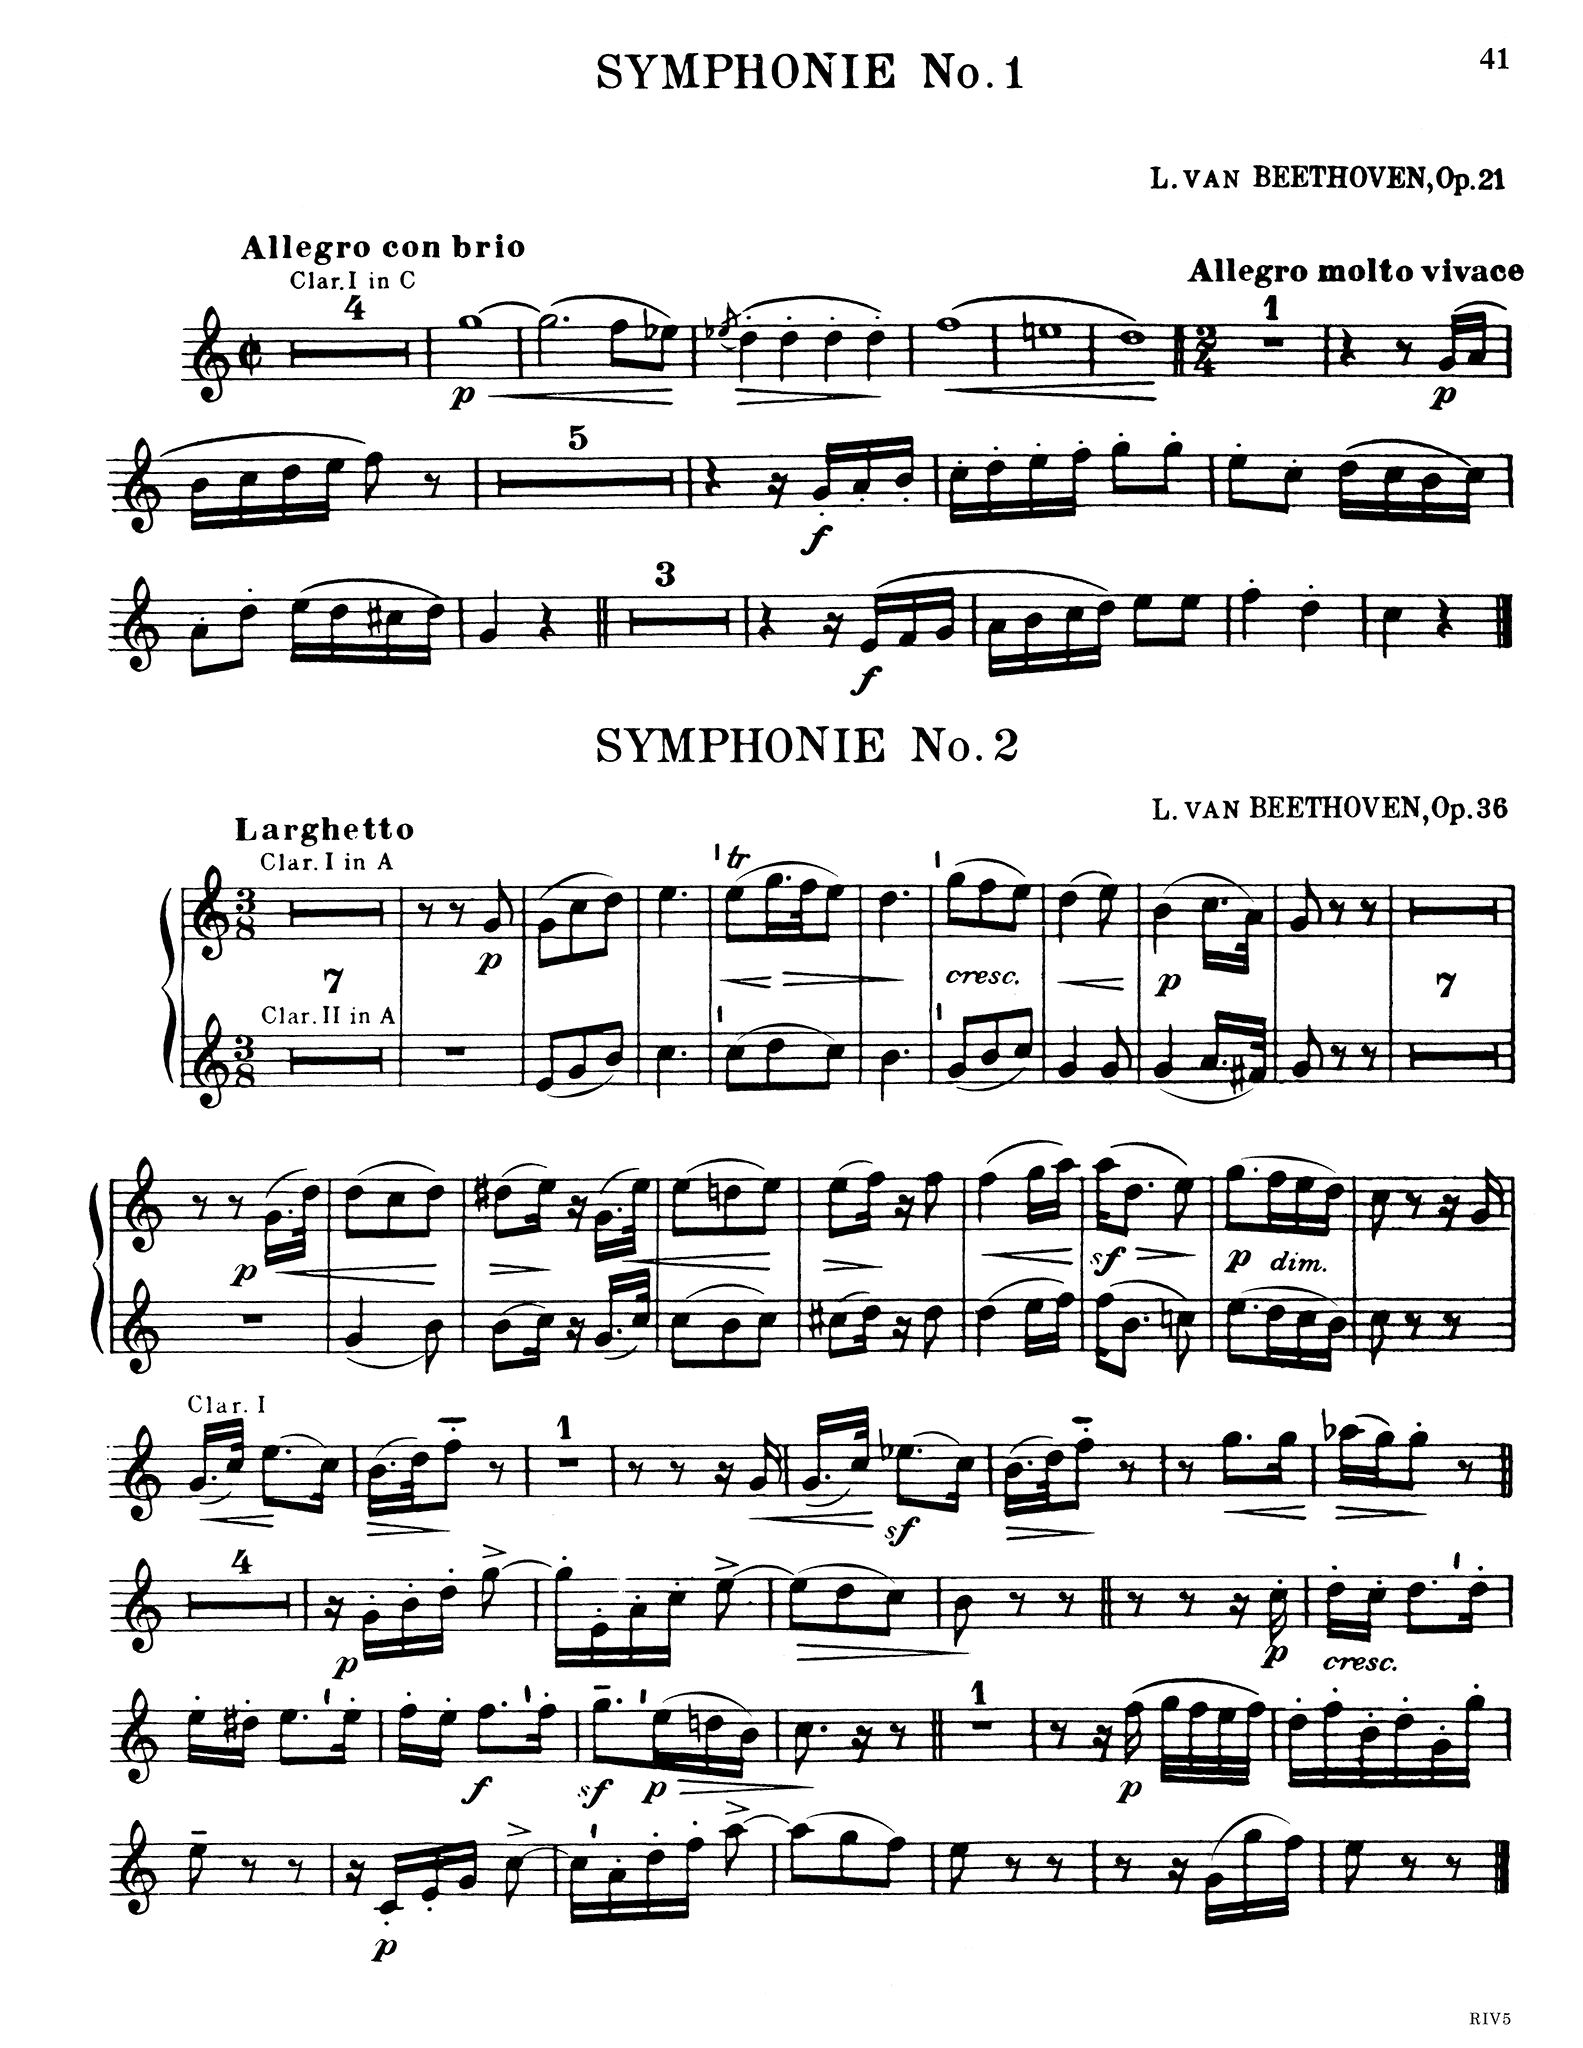 Daniel Bonade Orchestral Studies for clarinet page 1